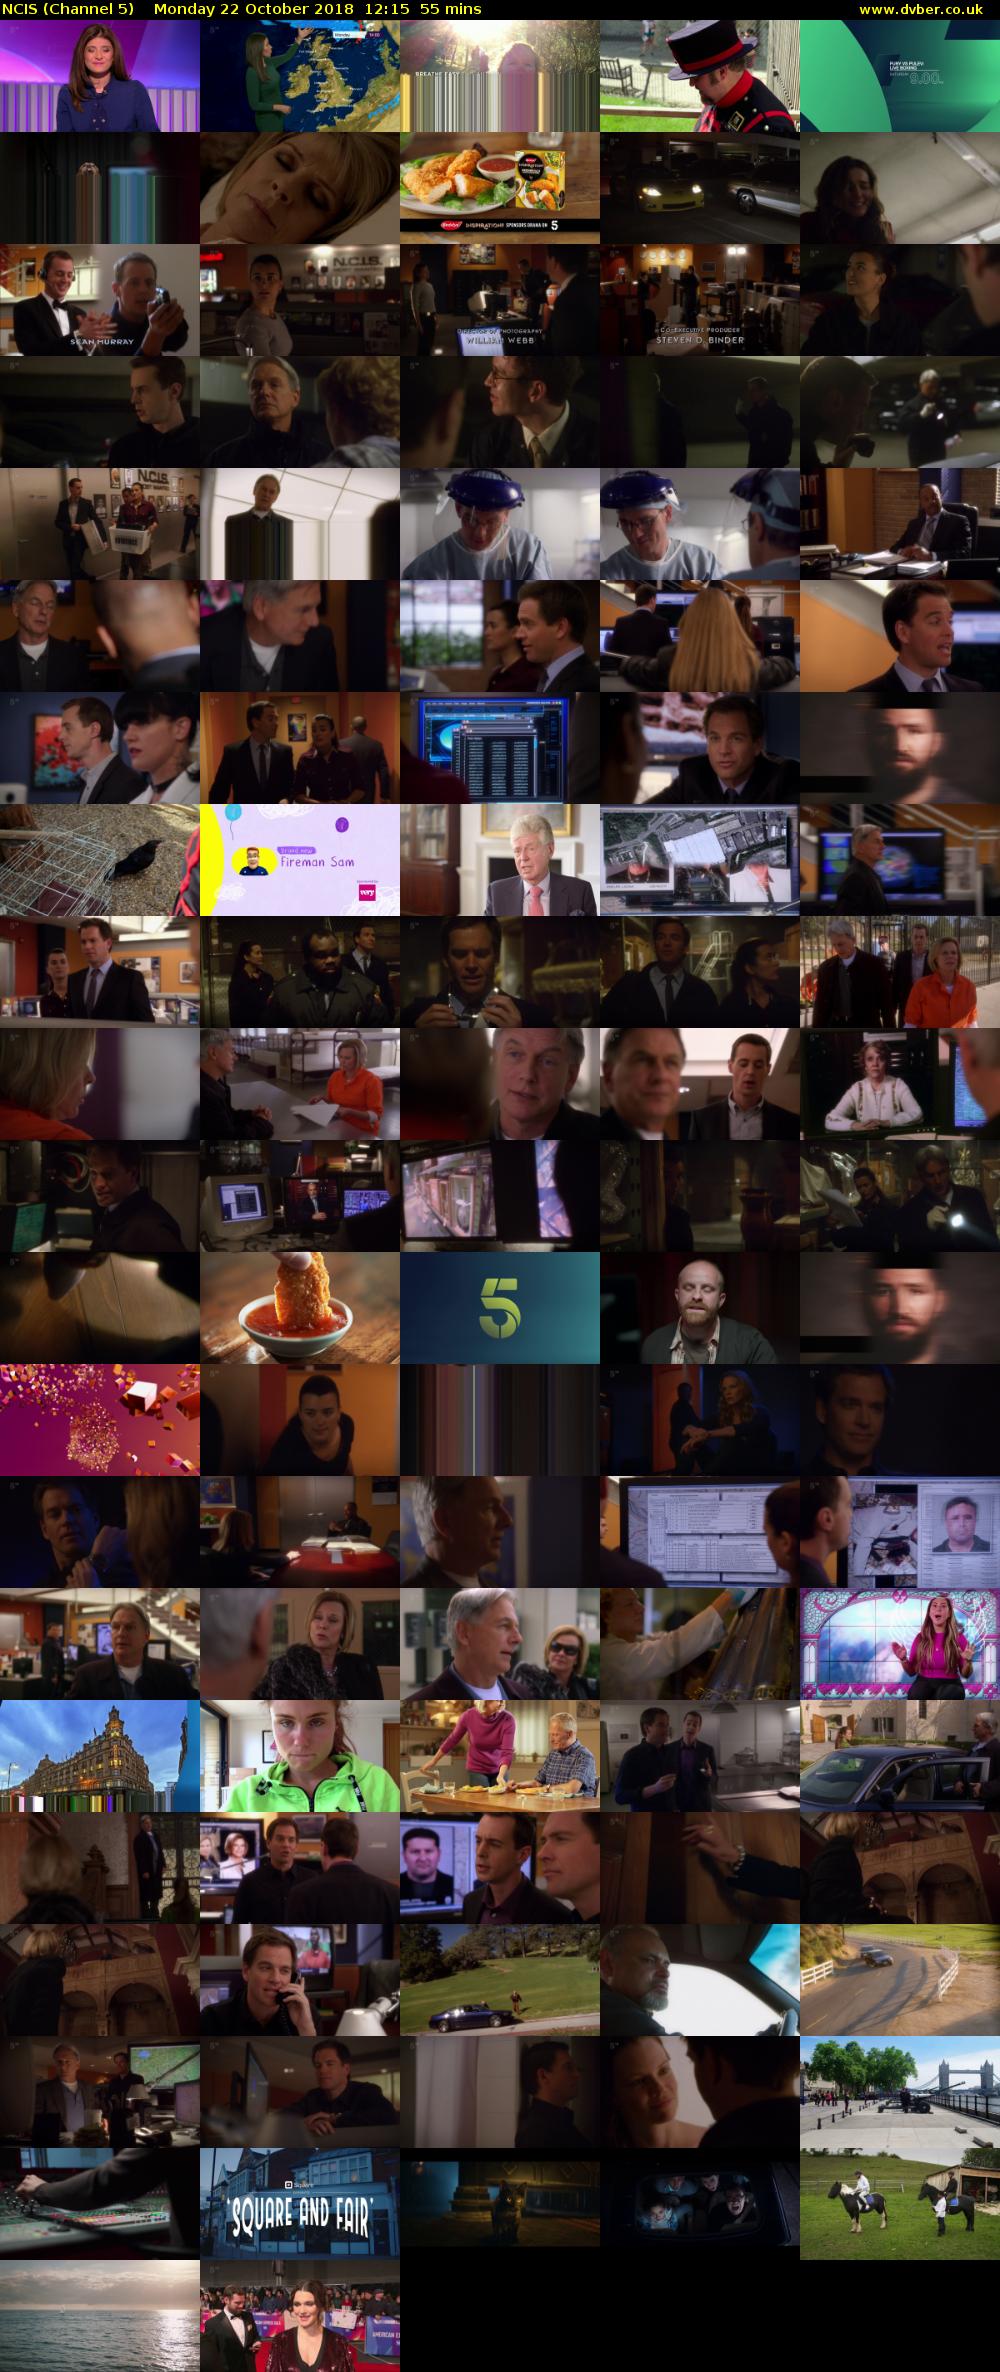 NCIS (Channel 5) Monday 22 October 2018 12:15 - 13:10